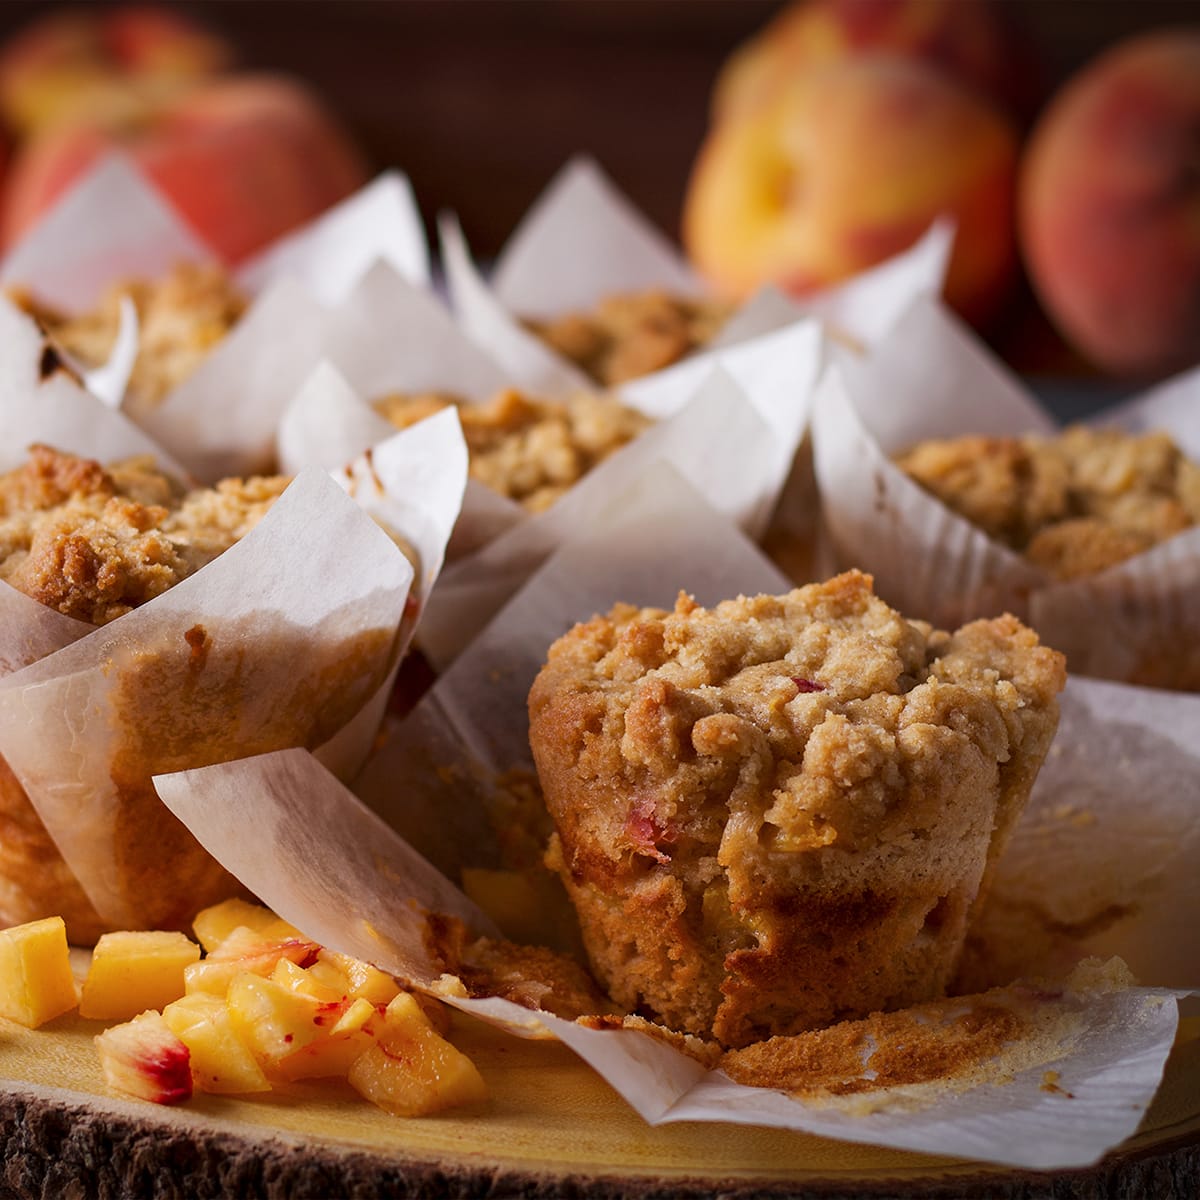 A wood tray filled with freshly baked peach cobbler muffins. One of the muffins is unwrapped so you can see the cobbler topping.